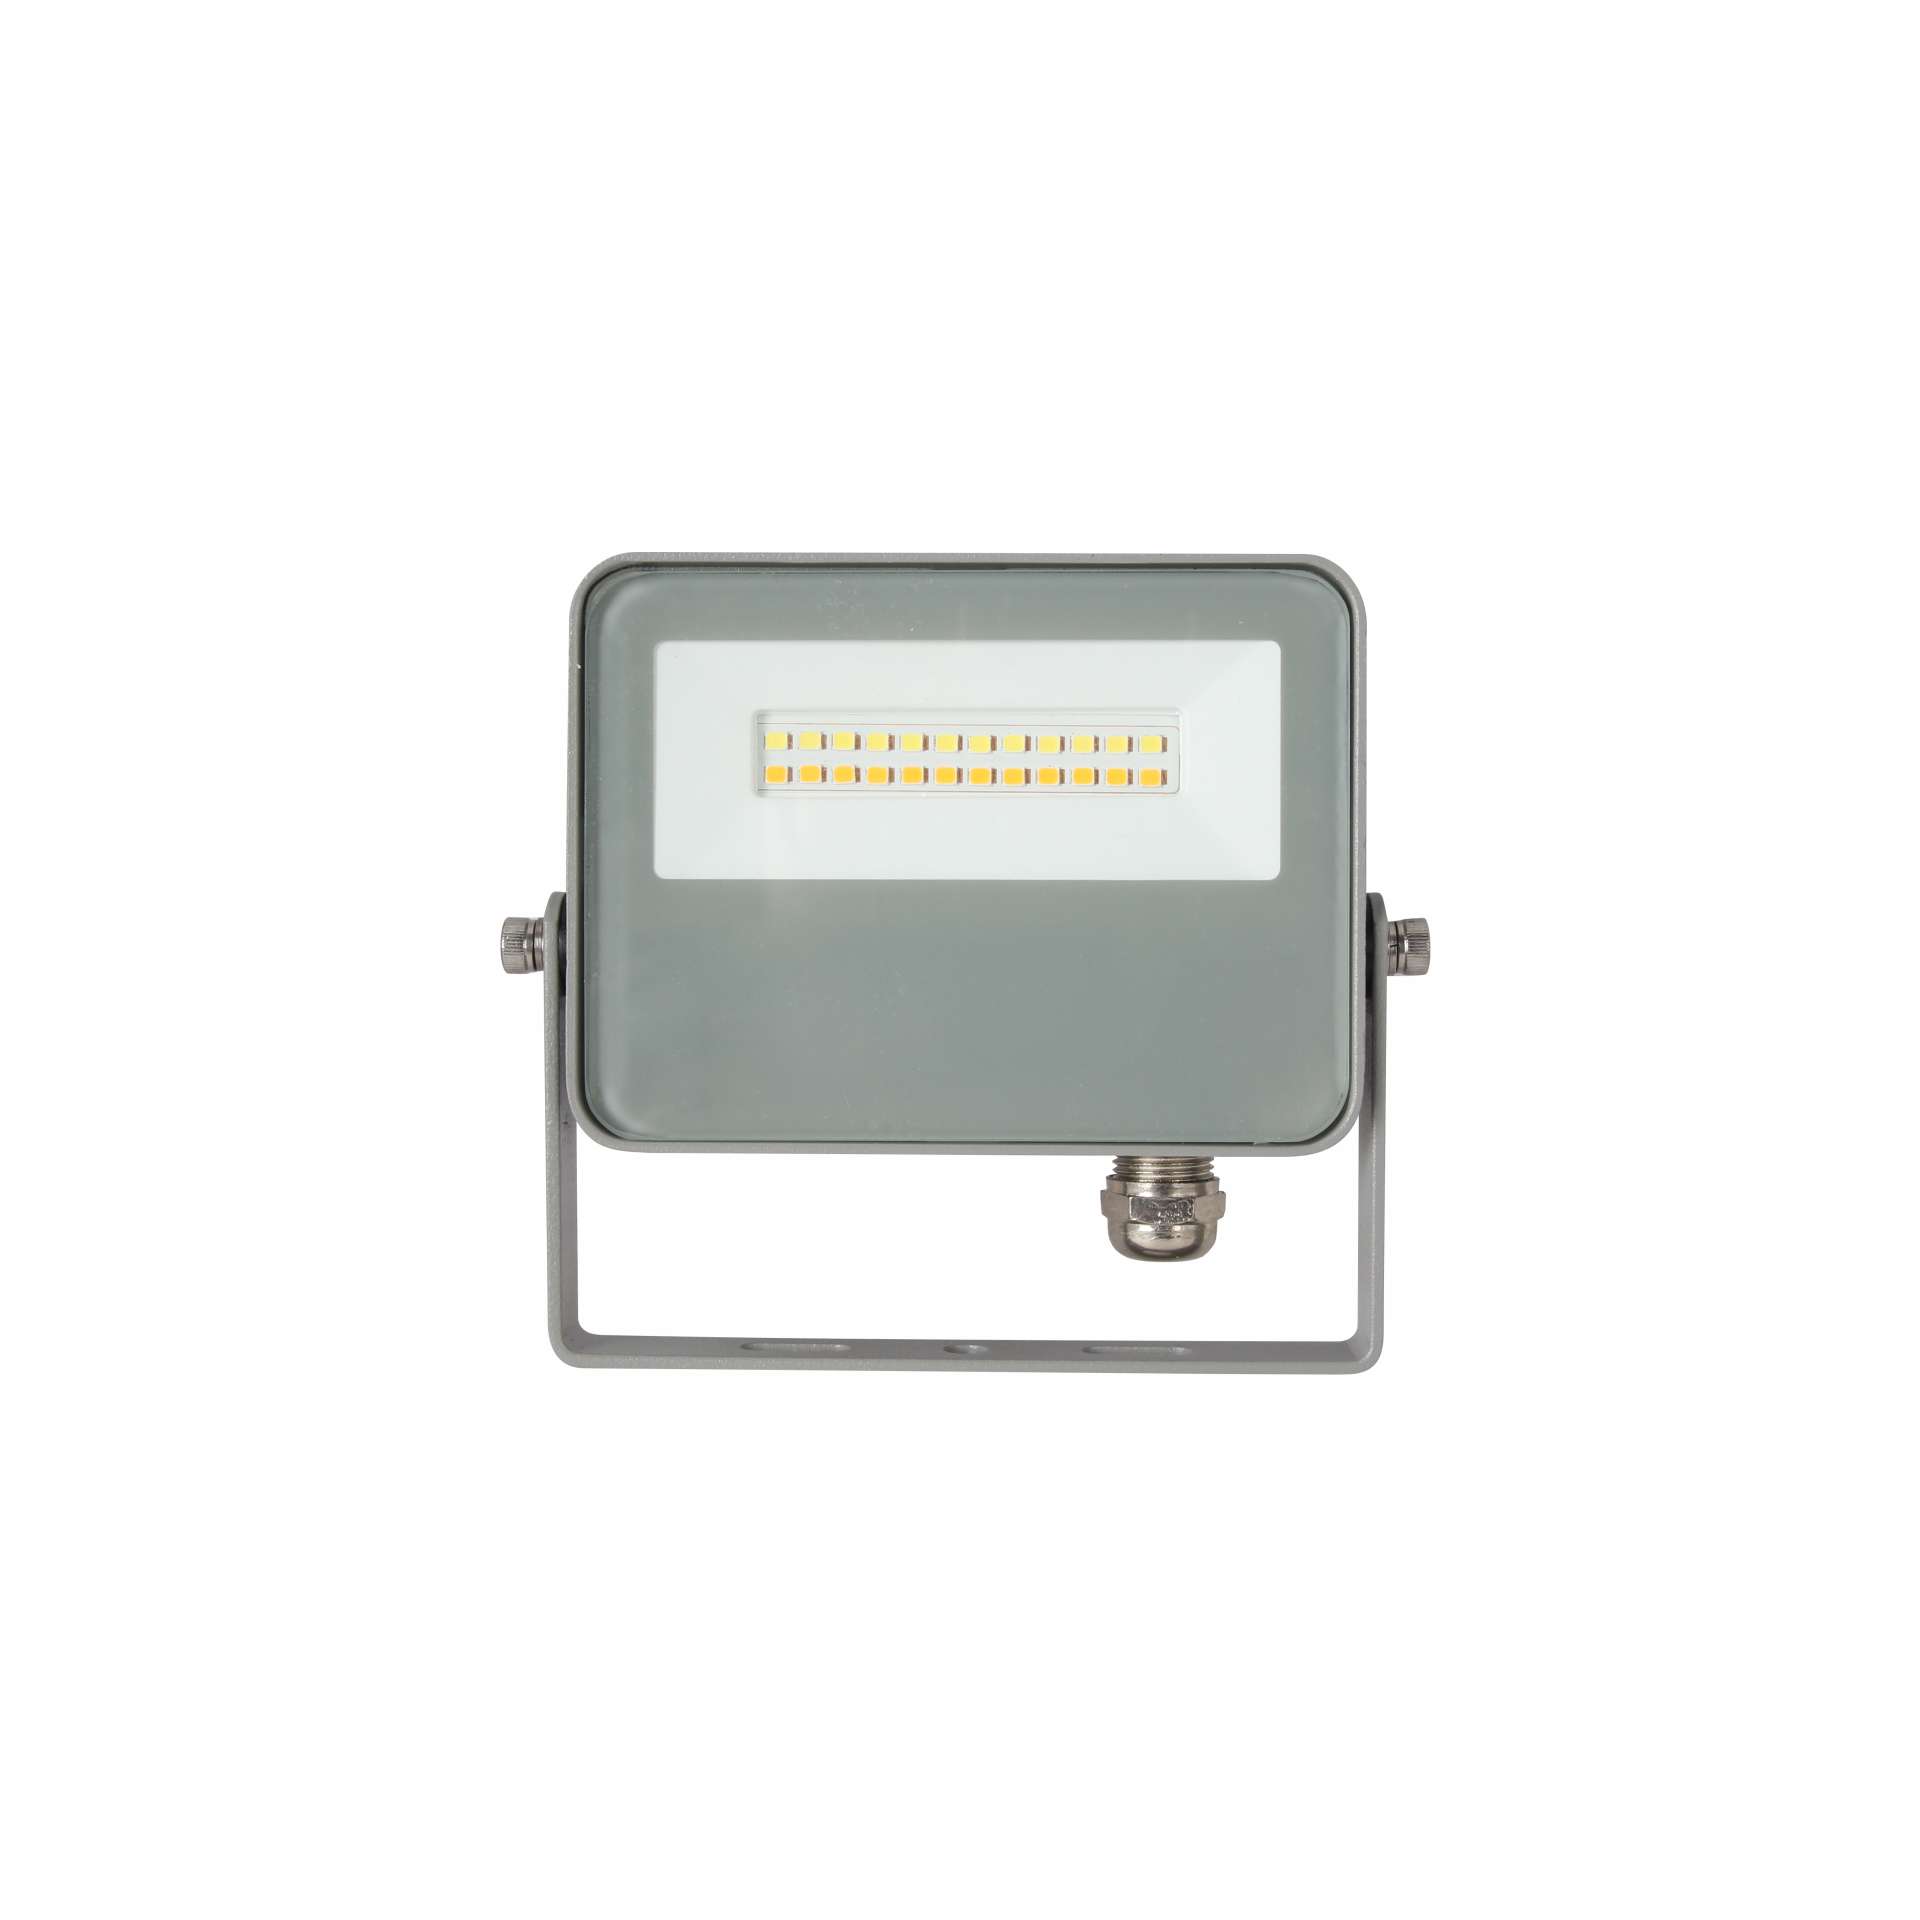 BENEITO FAURE 4681 PROYECTOR SKY-V4 GRIS ALUMINIO 10W 200-240V 110° SWITCH 3000-4000-5000K 1200lm